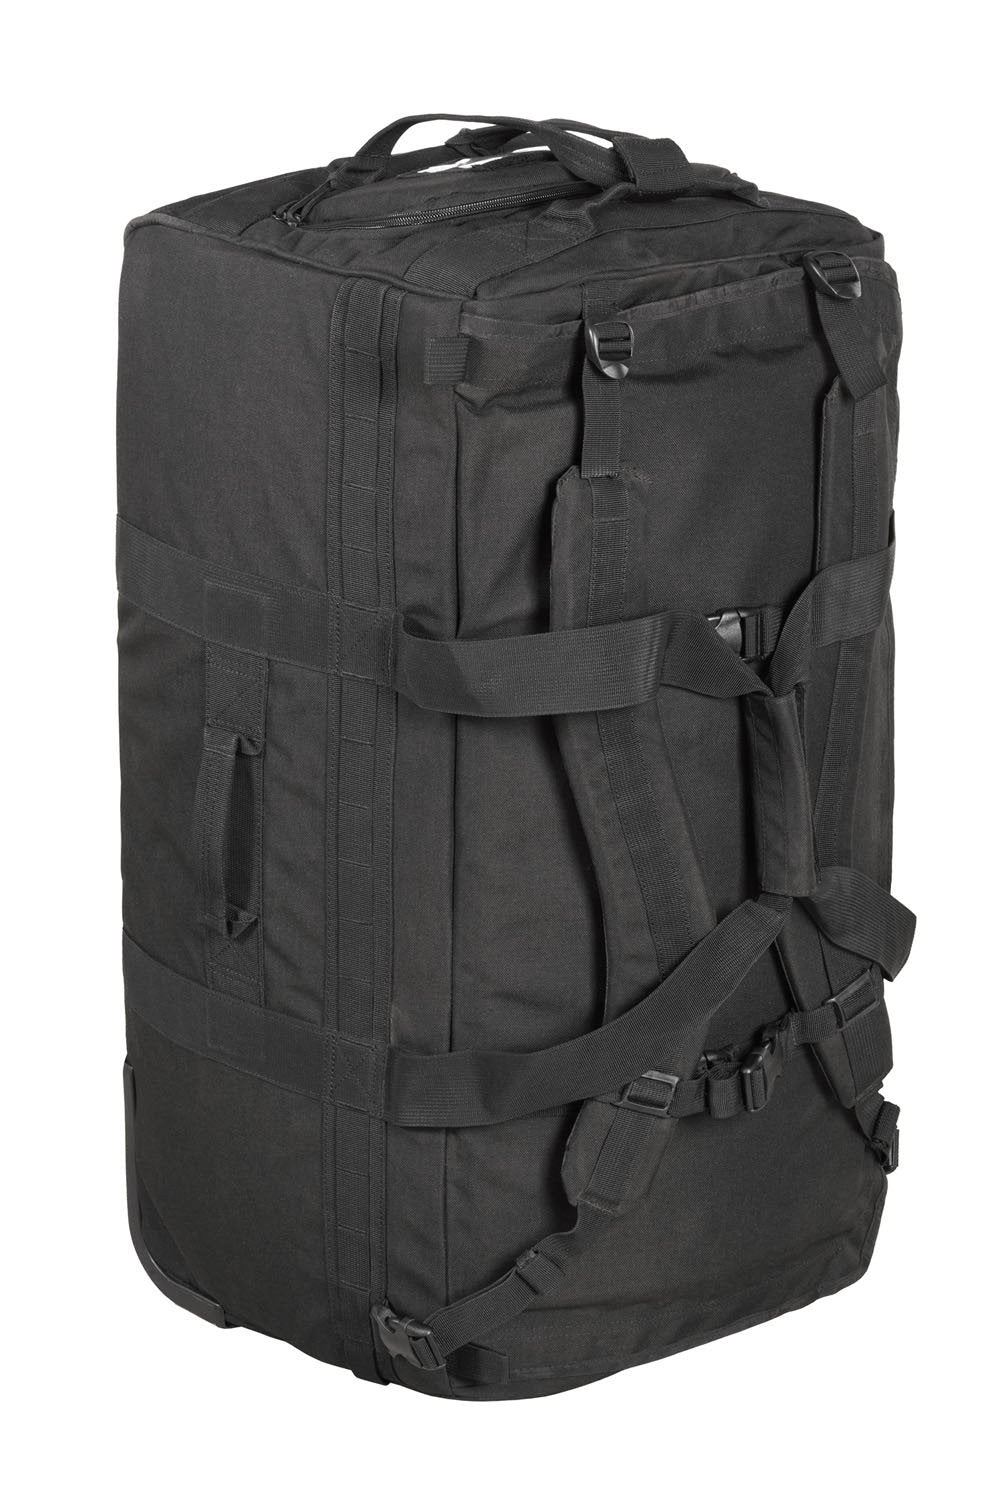 383 FIELD KITBAG side view